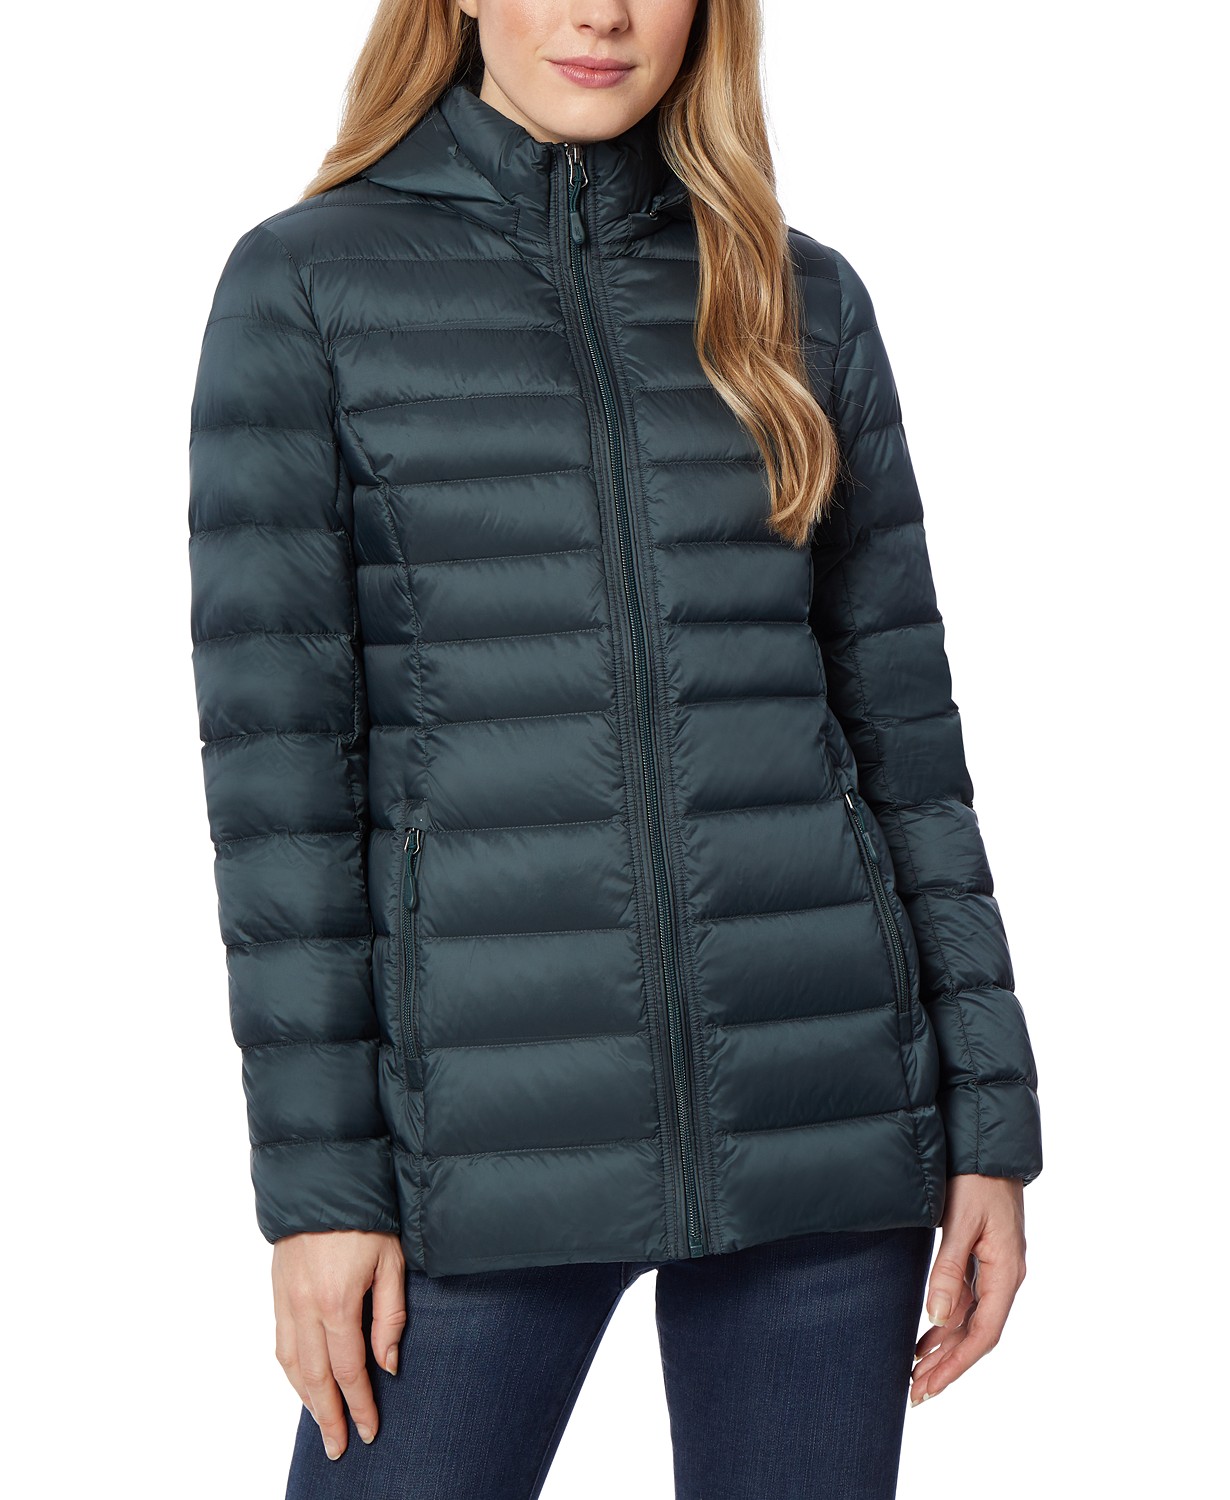 www.couturepoint.com-32-degrees-womens-blue-packable-down-puffer-coat-jacket-copy